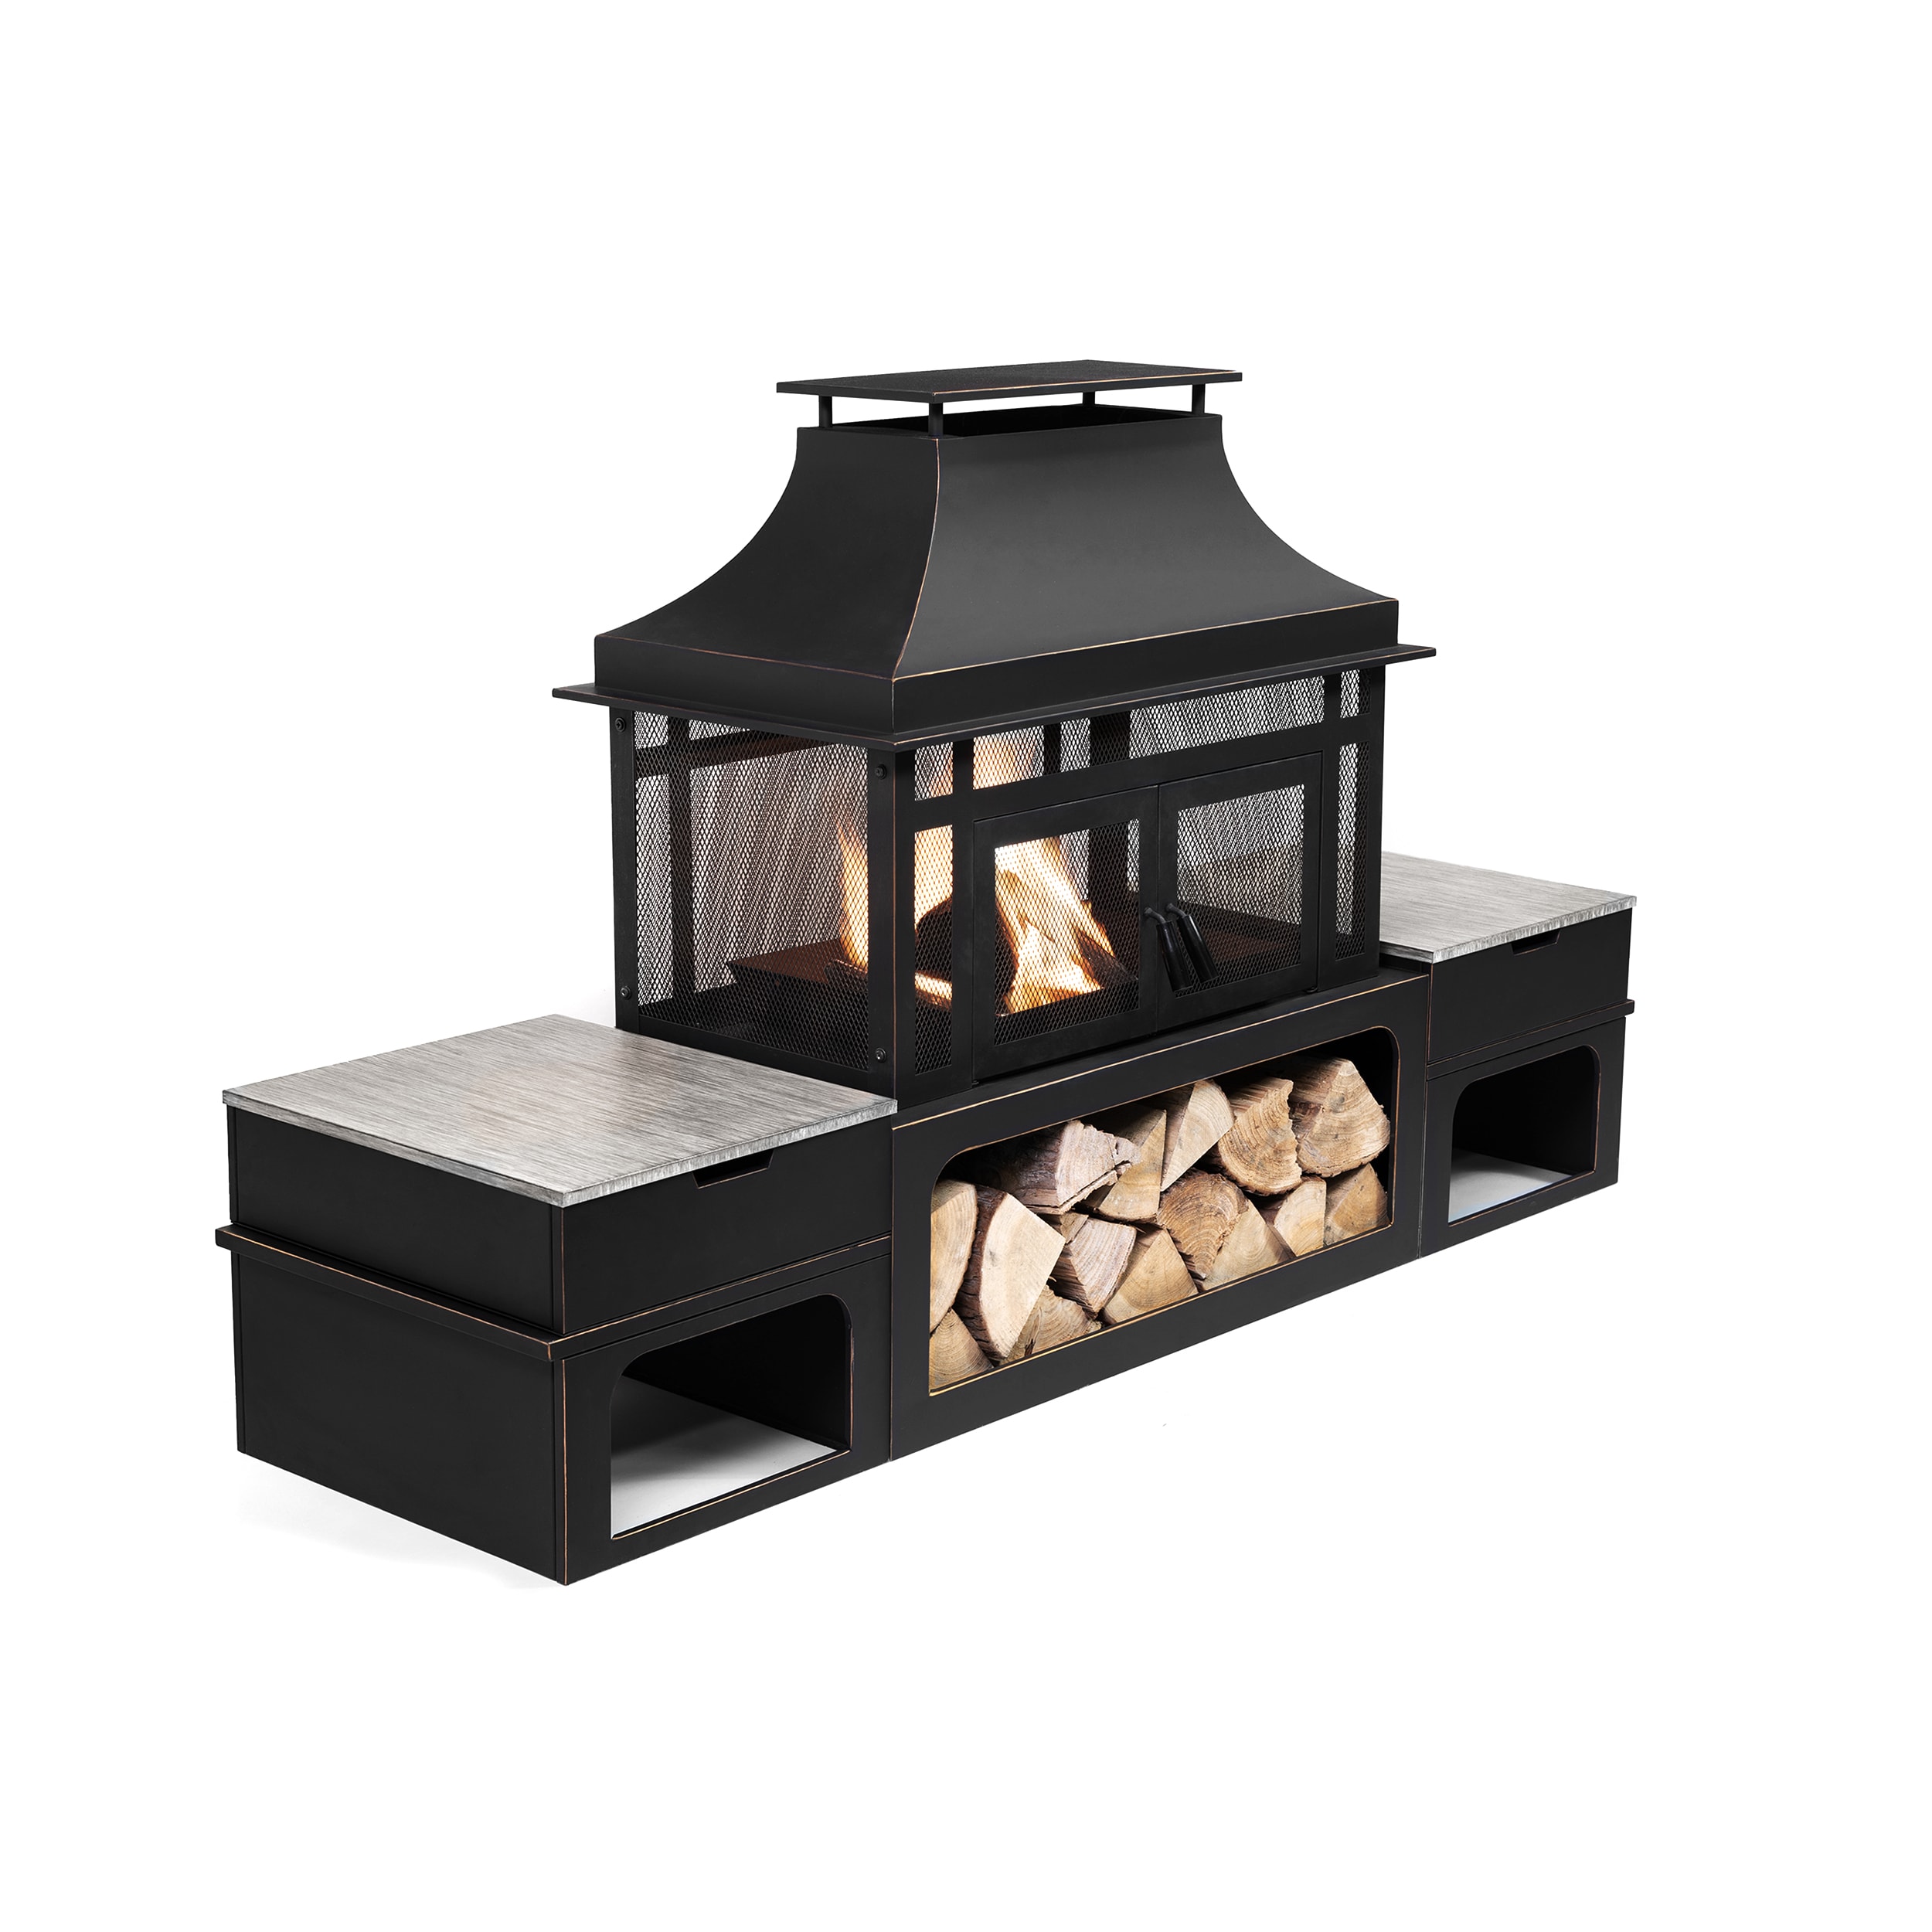 79.37-in Living Wood-Burning Wood-Burning Steel Deko at Fire W Black Fire Rustic the Pits Pit department in